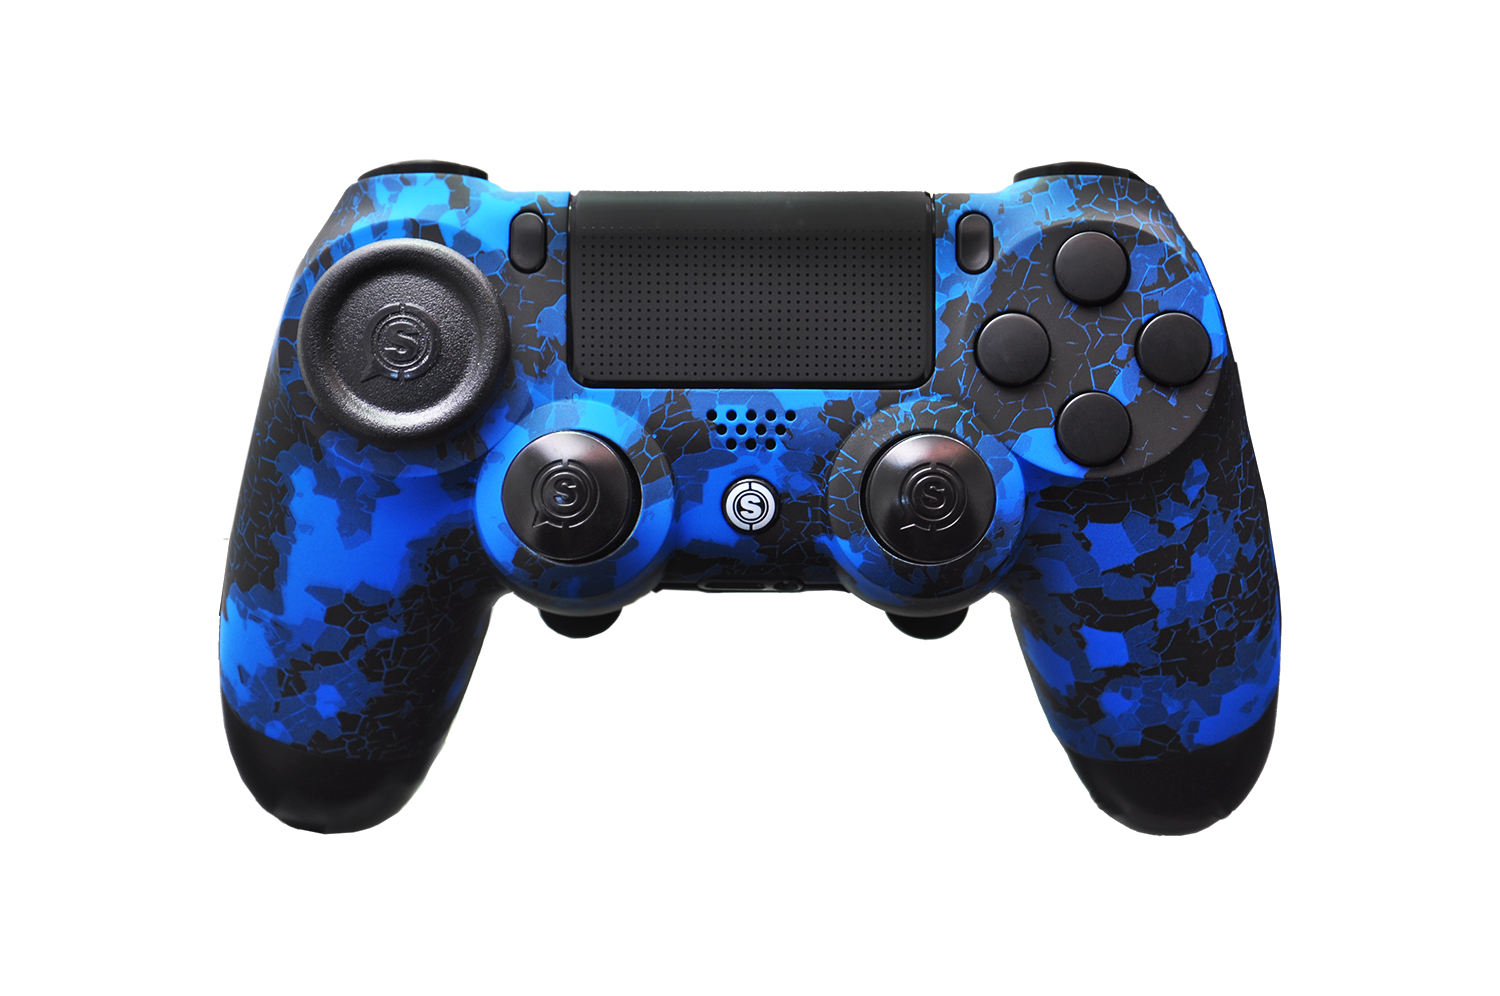 Ps5 wifi. Ps5 Dualshock 5. Геймпад ps4 Dualshock черный. Геймпад ps4 Atomic. Scuff Controller ps4.